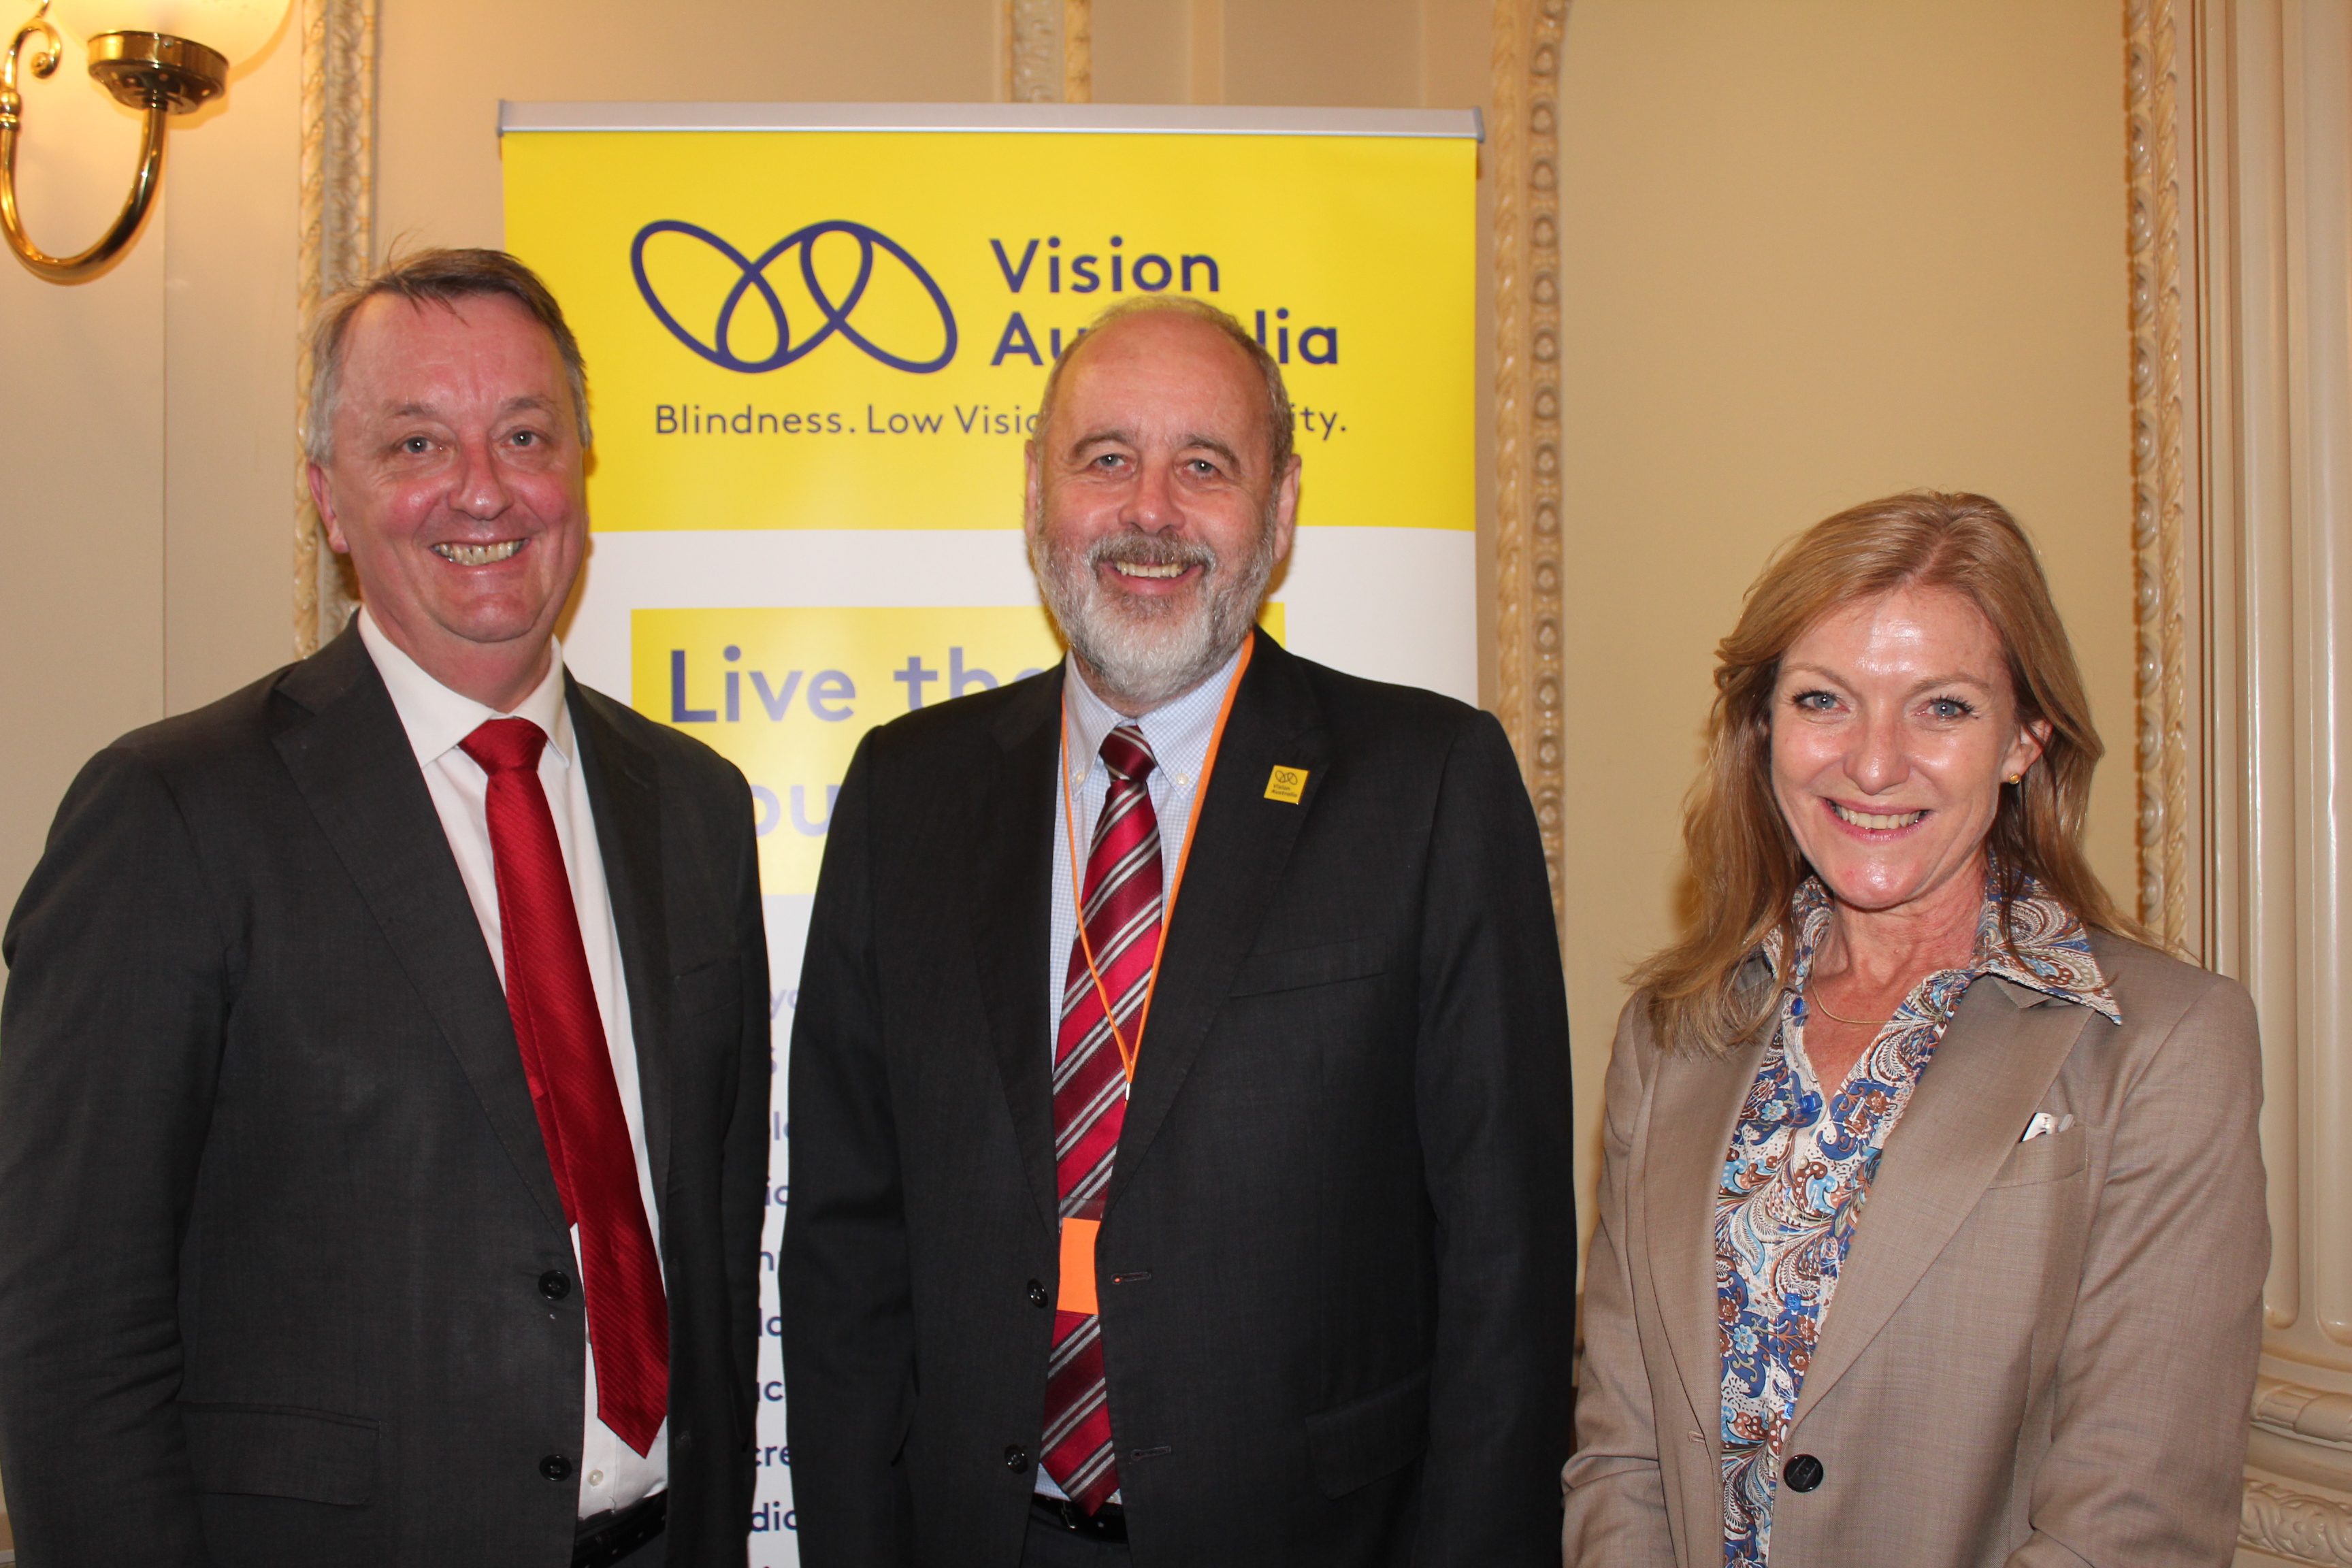 Minister for Housing, Disability and Ageing Hon Martin Foley MP, Vision Australia CEO Ron Hooton and Fiona Patten MLC